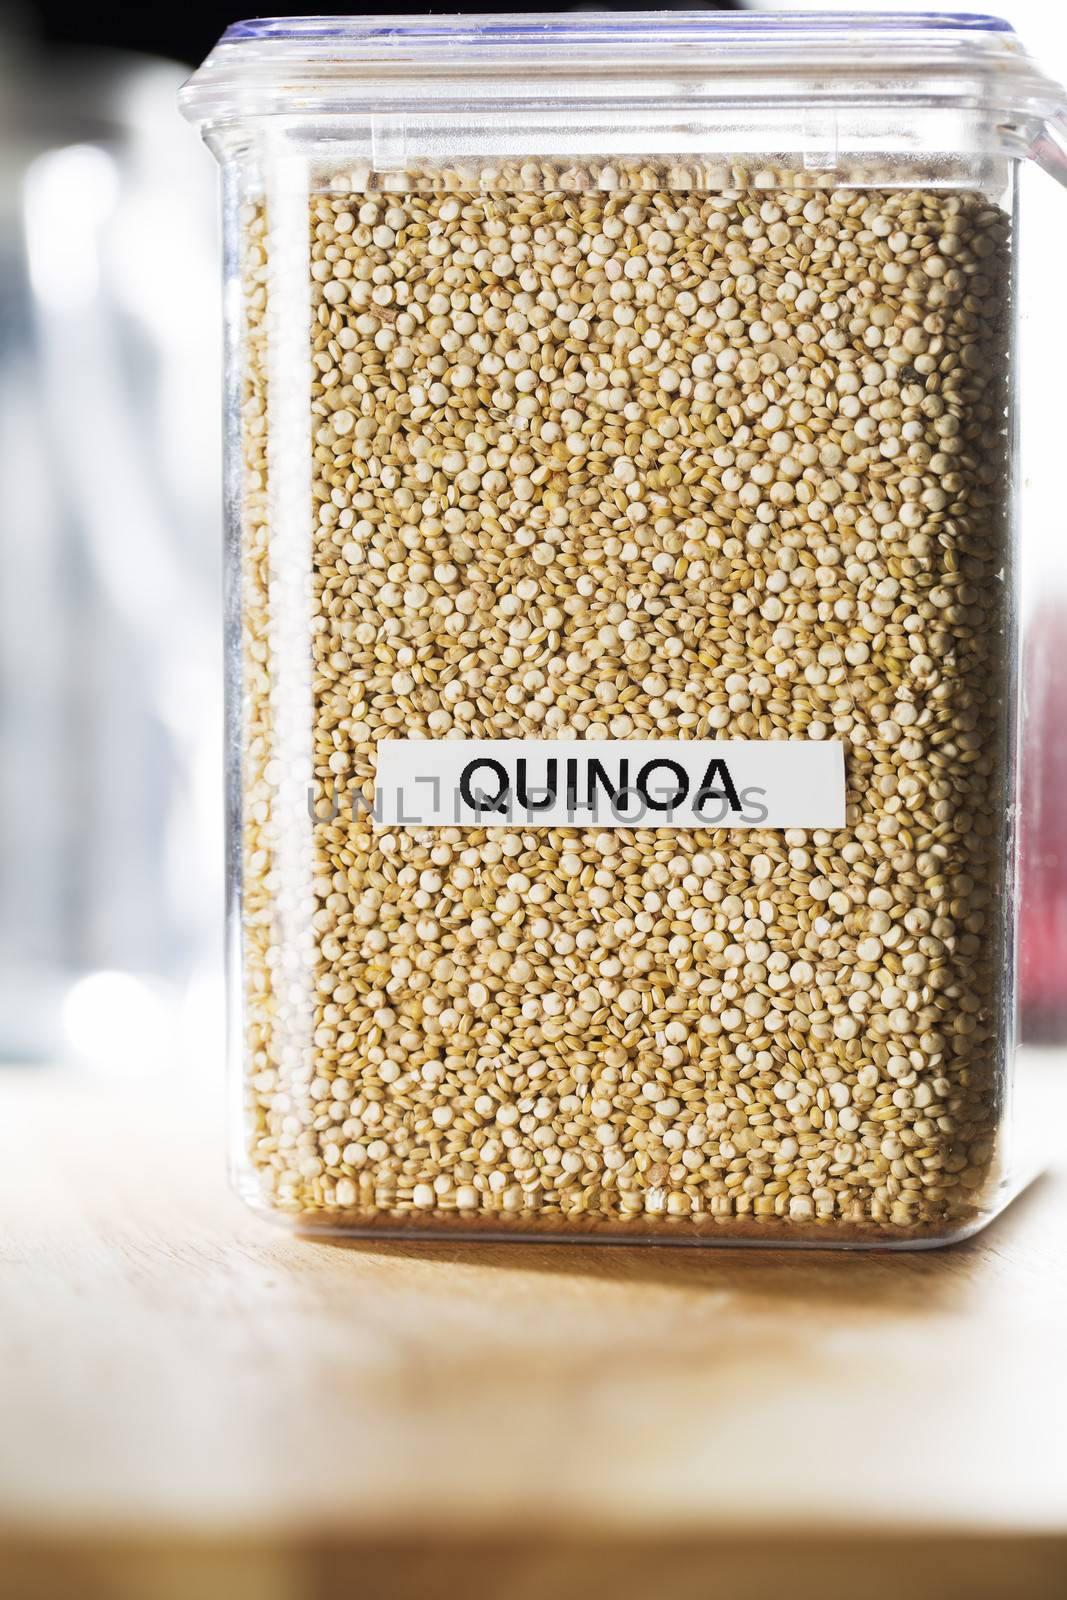 Quinoa in labeled container on counter.